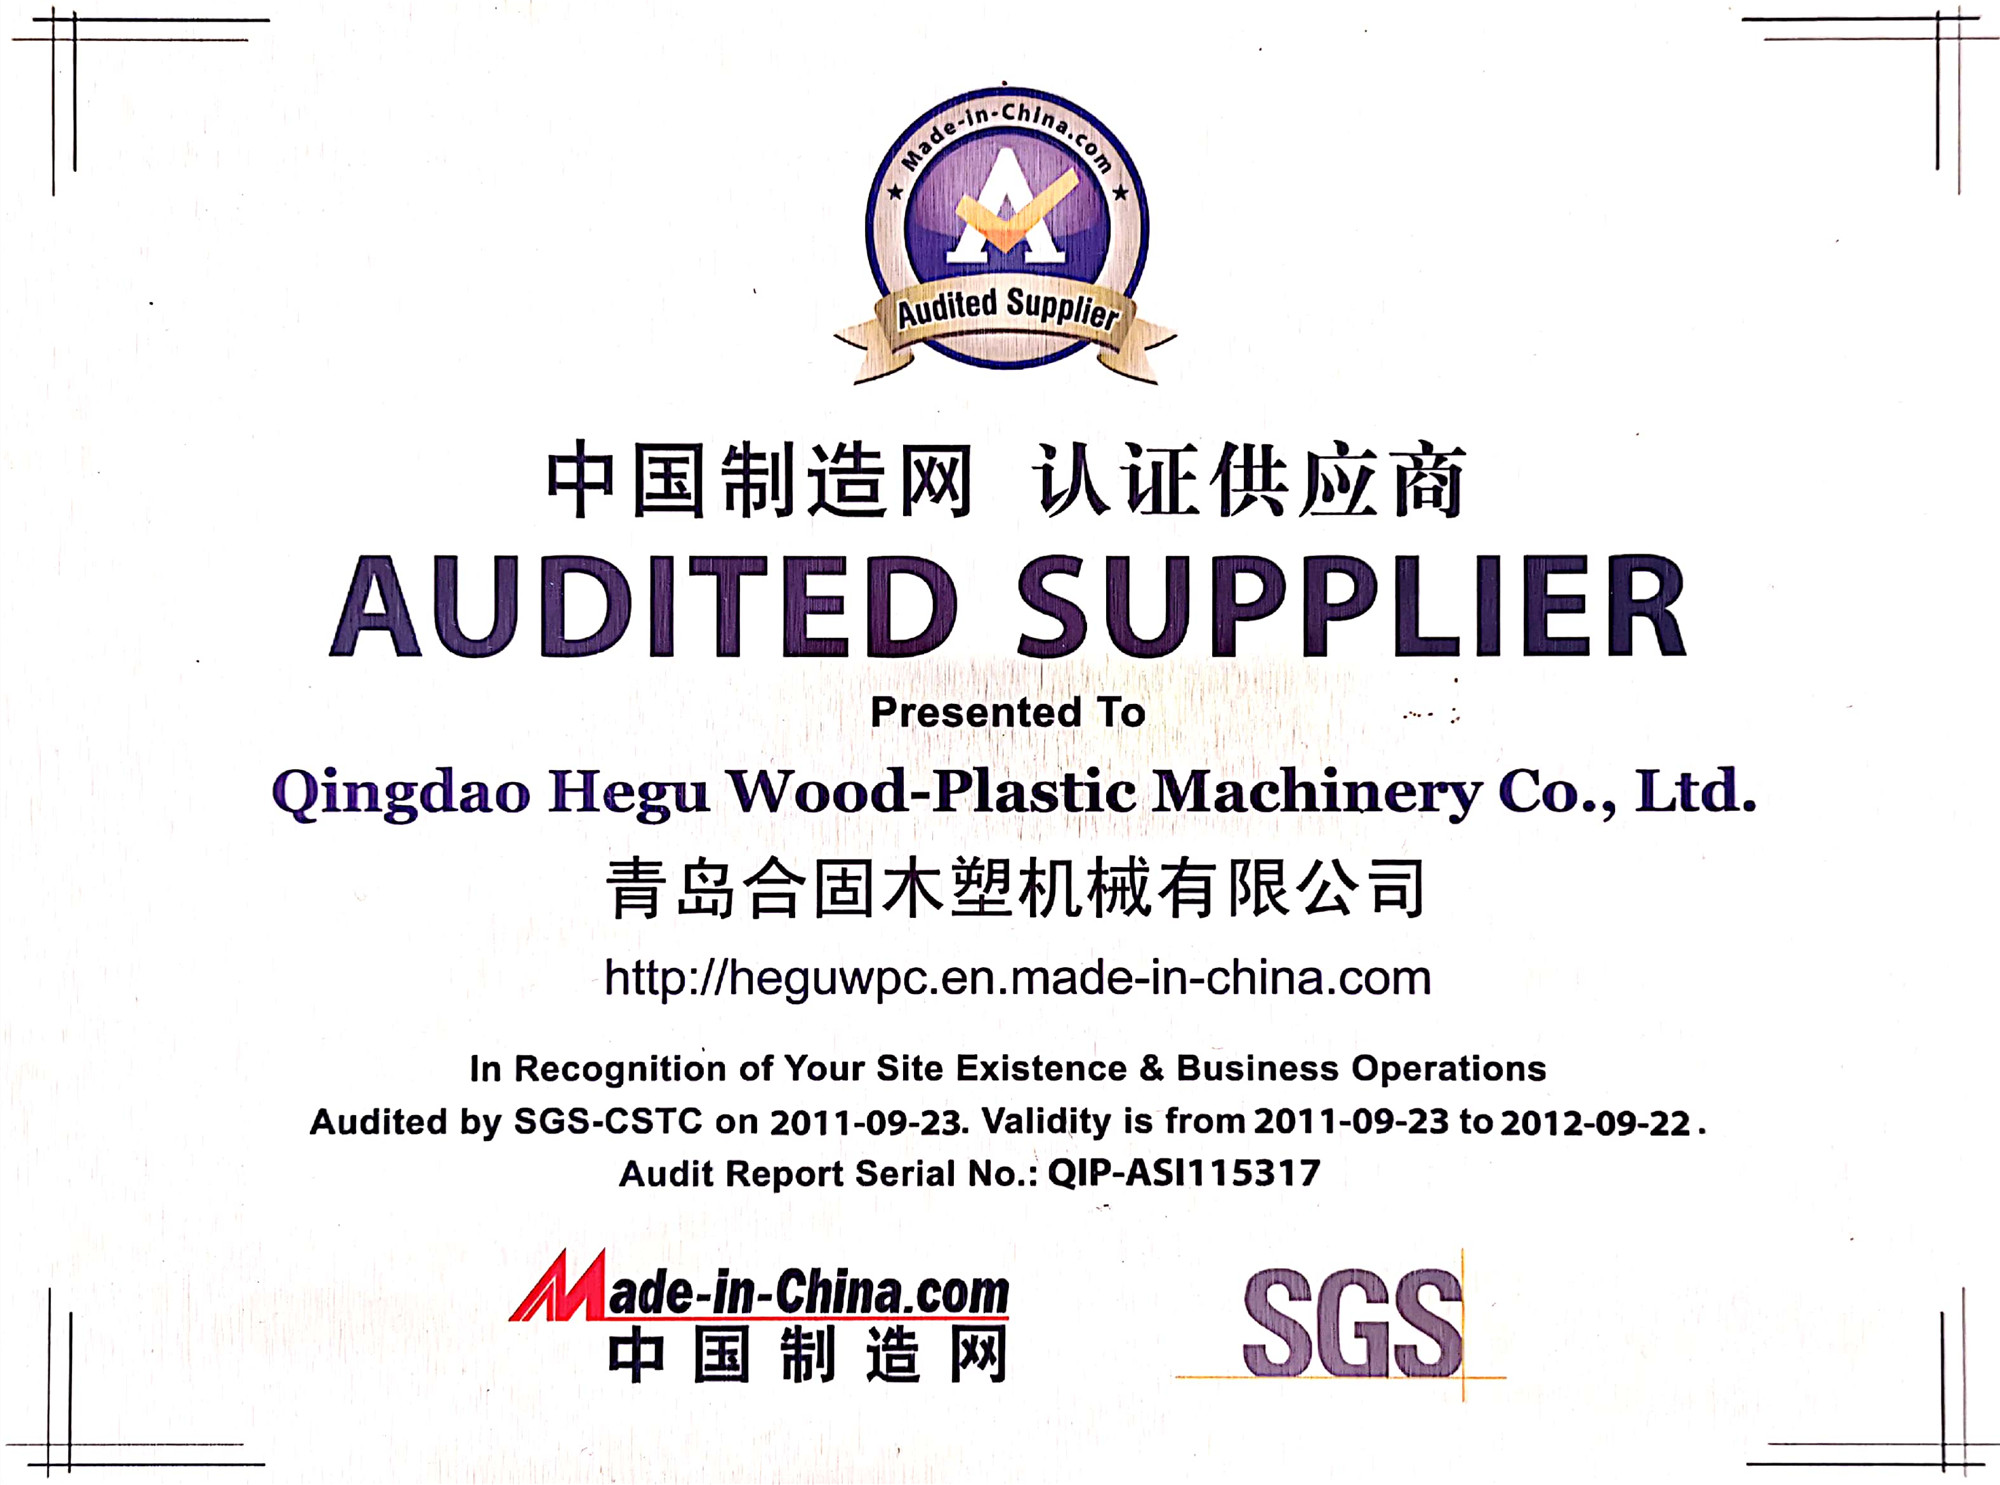 AUDITED SUPPLIER MADE IN CHINA